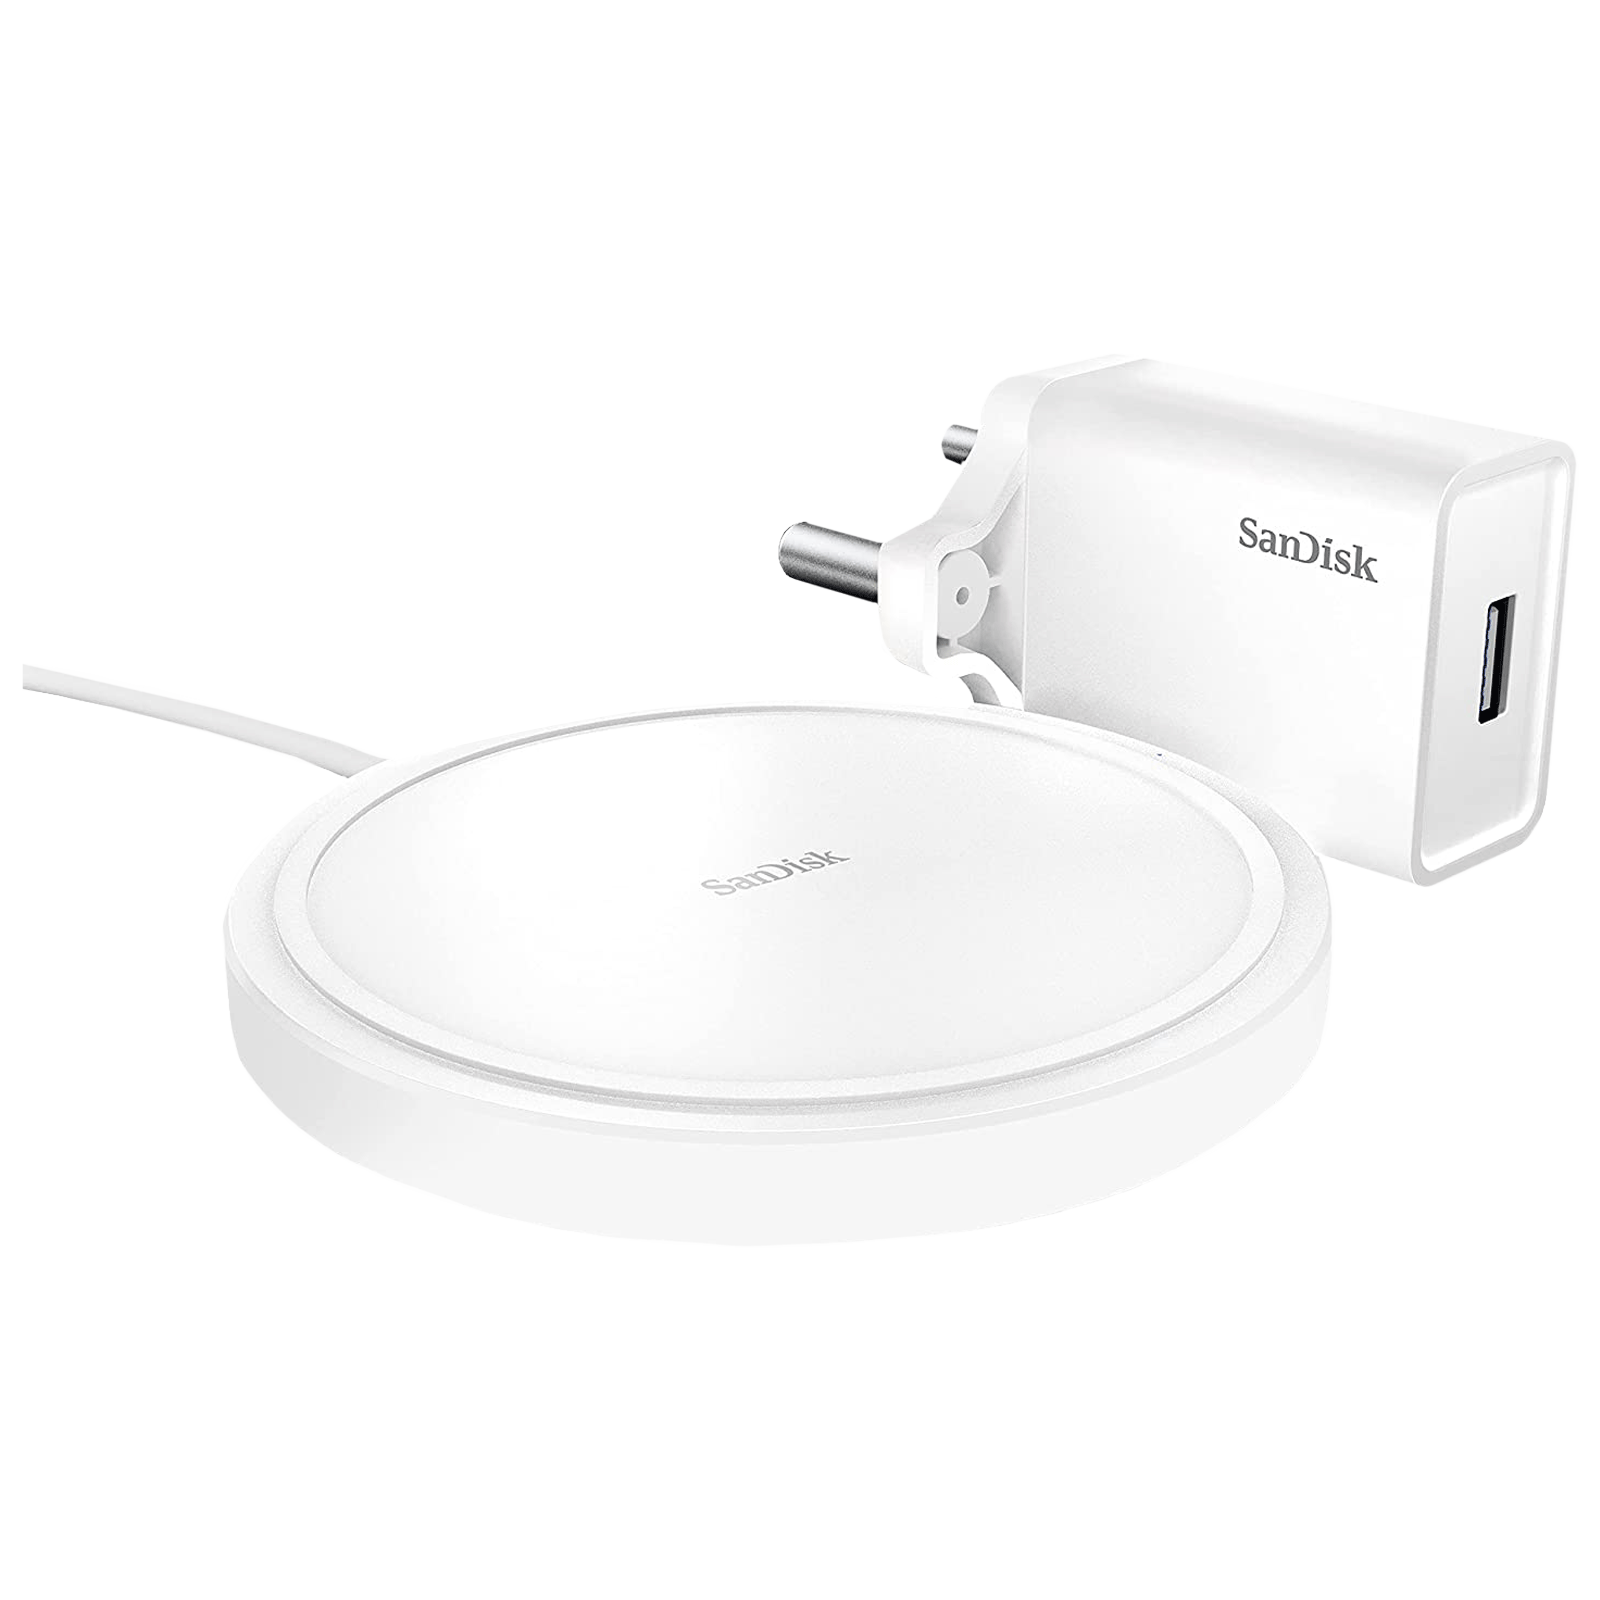 SanDisk Ixpand 15W Wireless Charger for iOS, Android, Earbuds (Qi Certified, Temprature Control Technology, White)